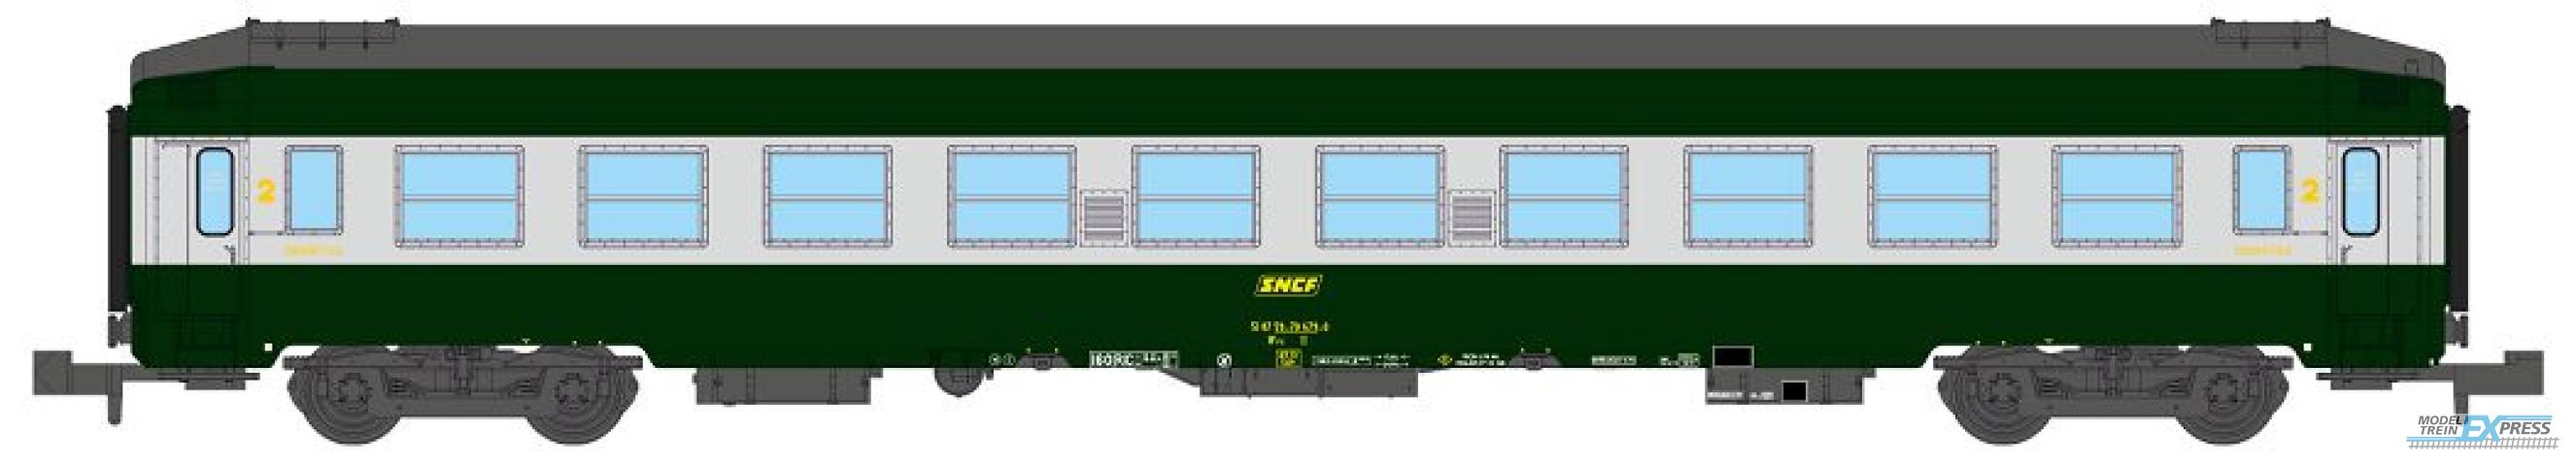 REE models NW-188 UIC SLEEPING CAR High roof with grey color, Green-Alu 160 color Era IV